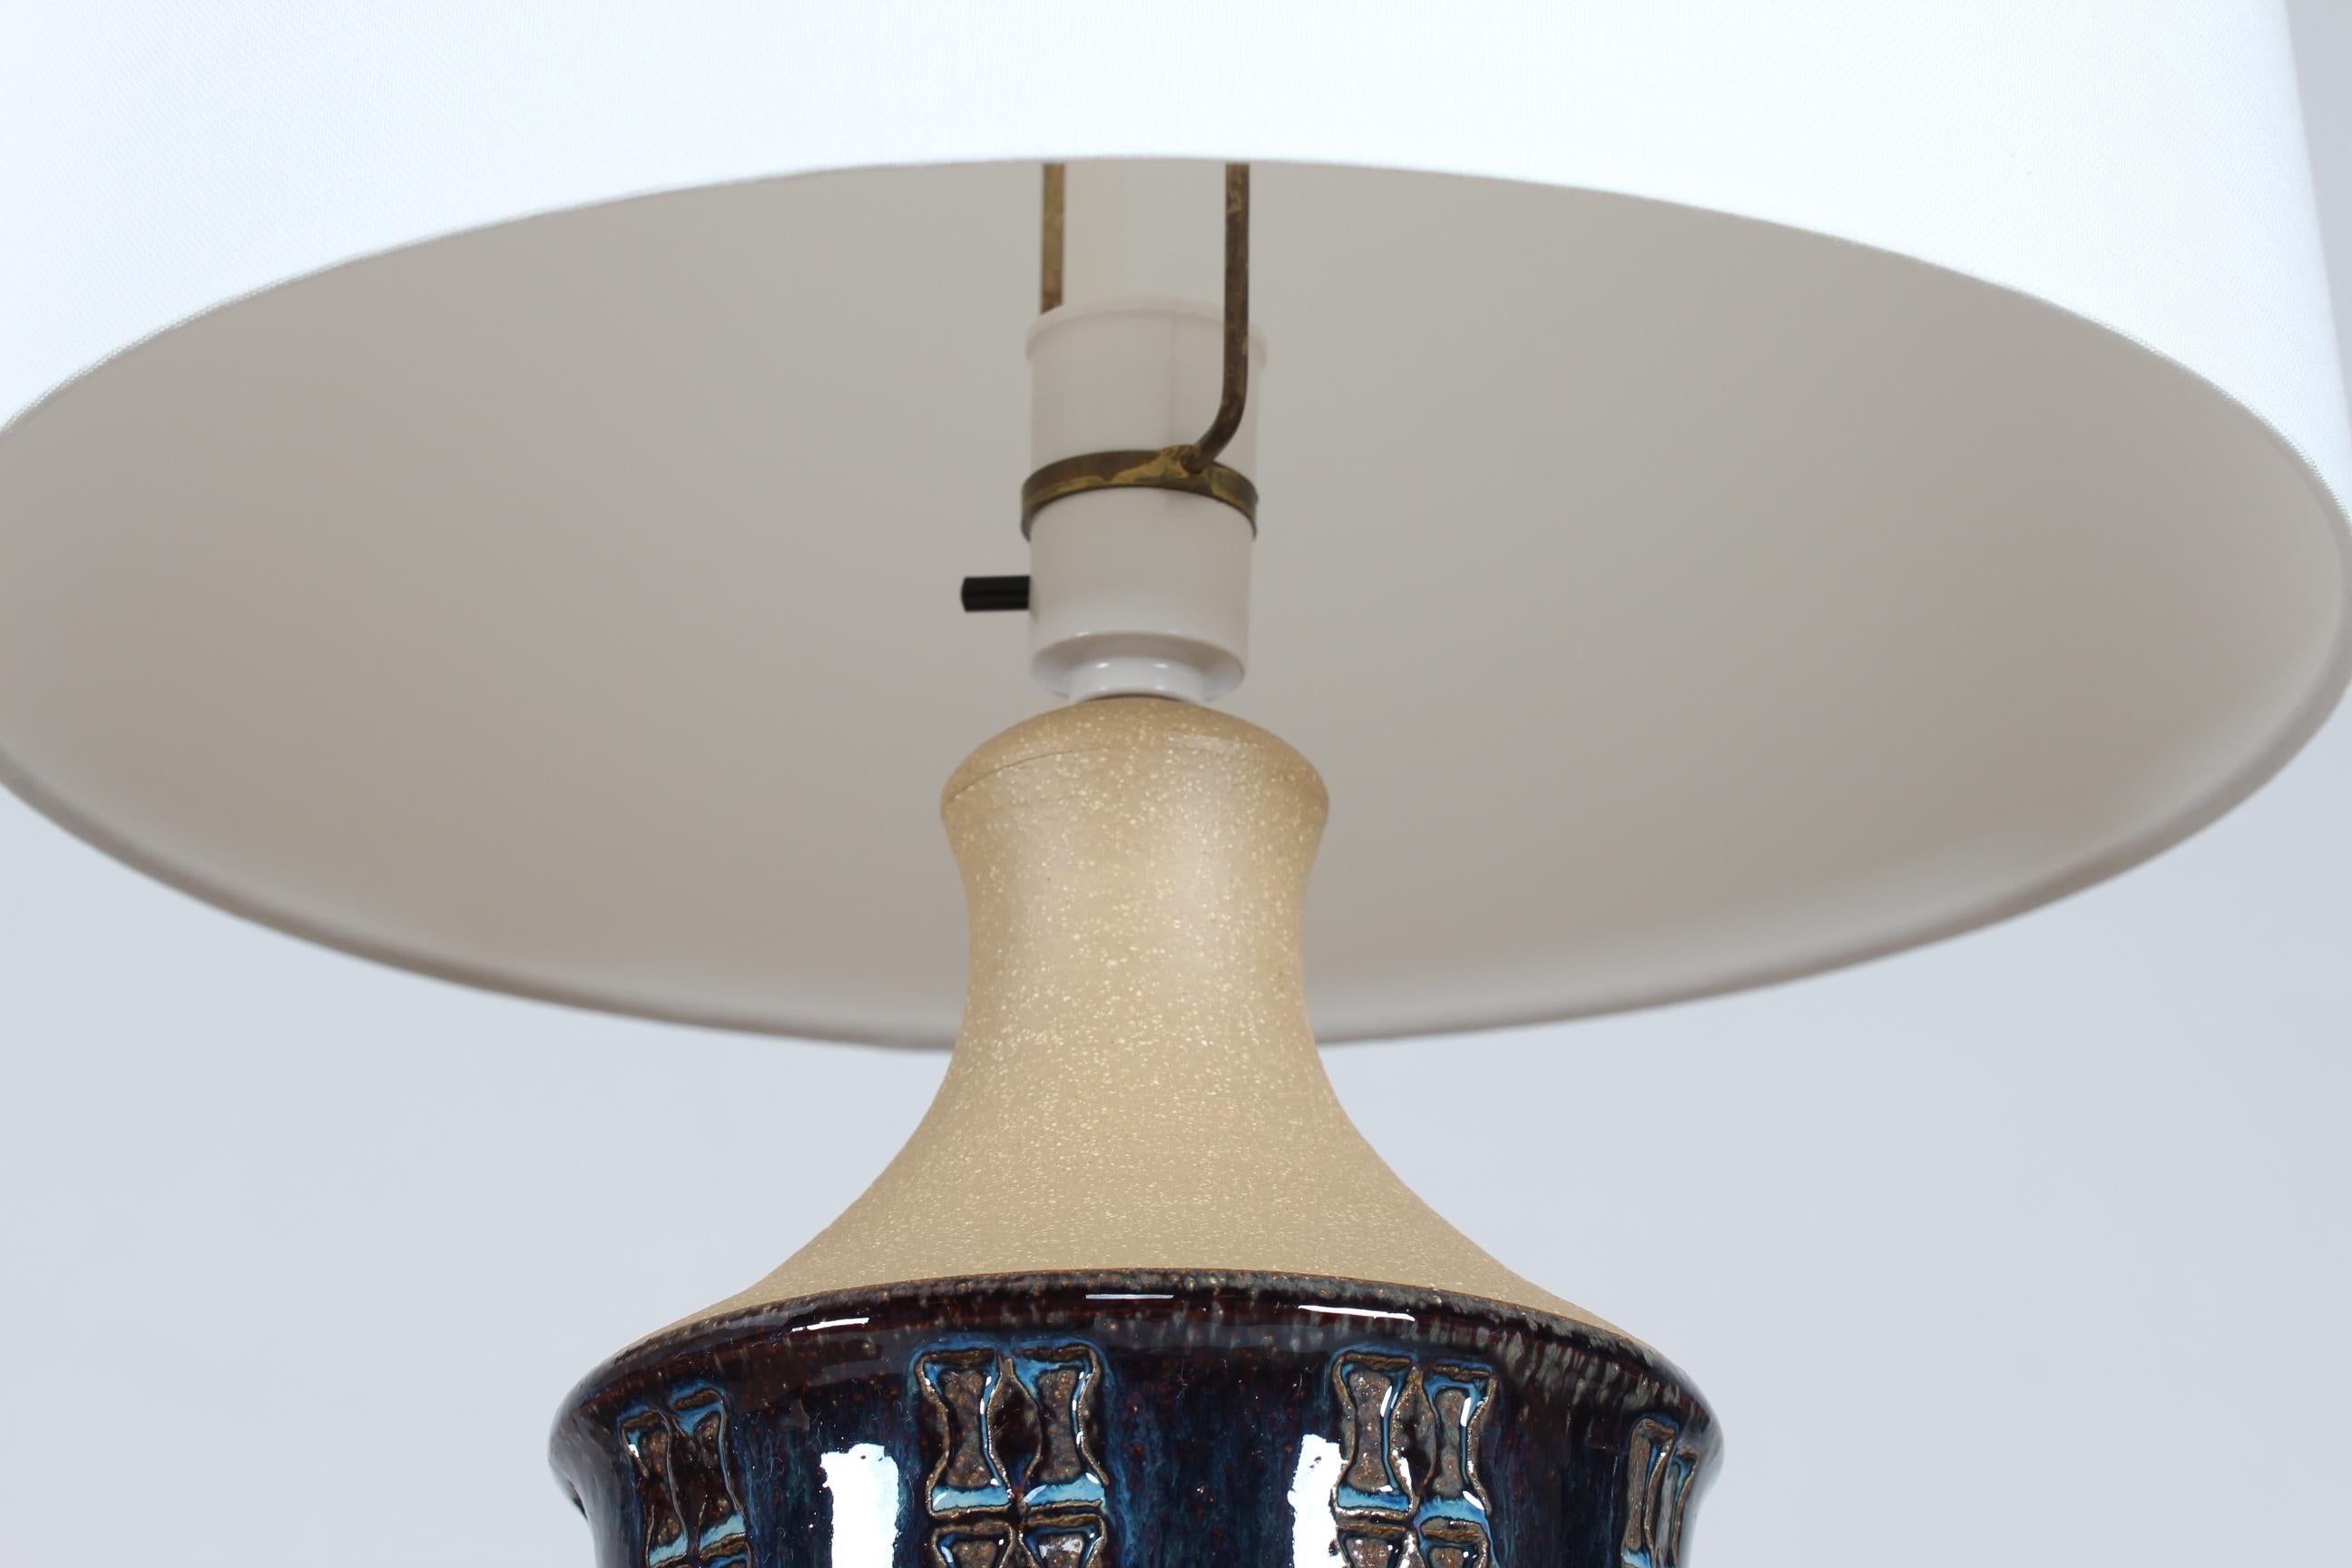 A pair of tall stoneware table lamps designed by Maria Philippi and made by the pottery Søholm on the island of Bornholm in Denmark in the 1960´s.
The lamp base is decorated with an embossed pattern in bands and glossy glaze in blue colors - the